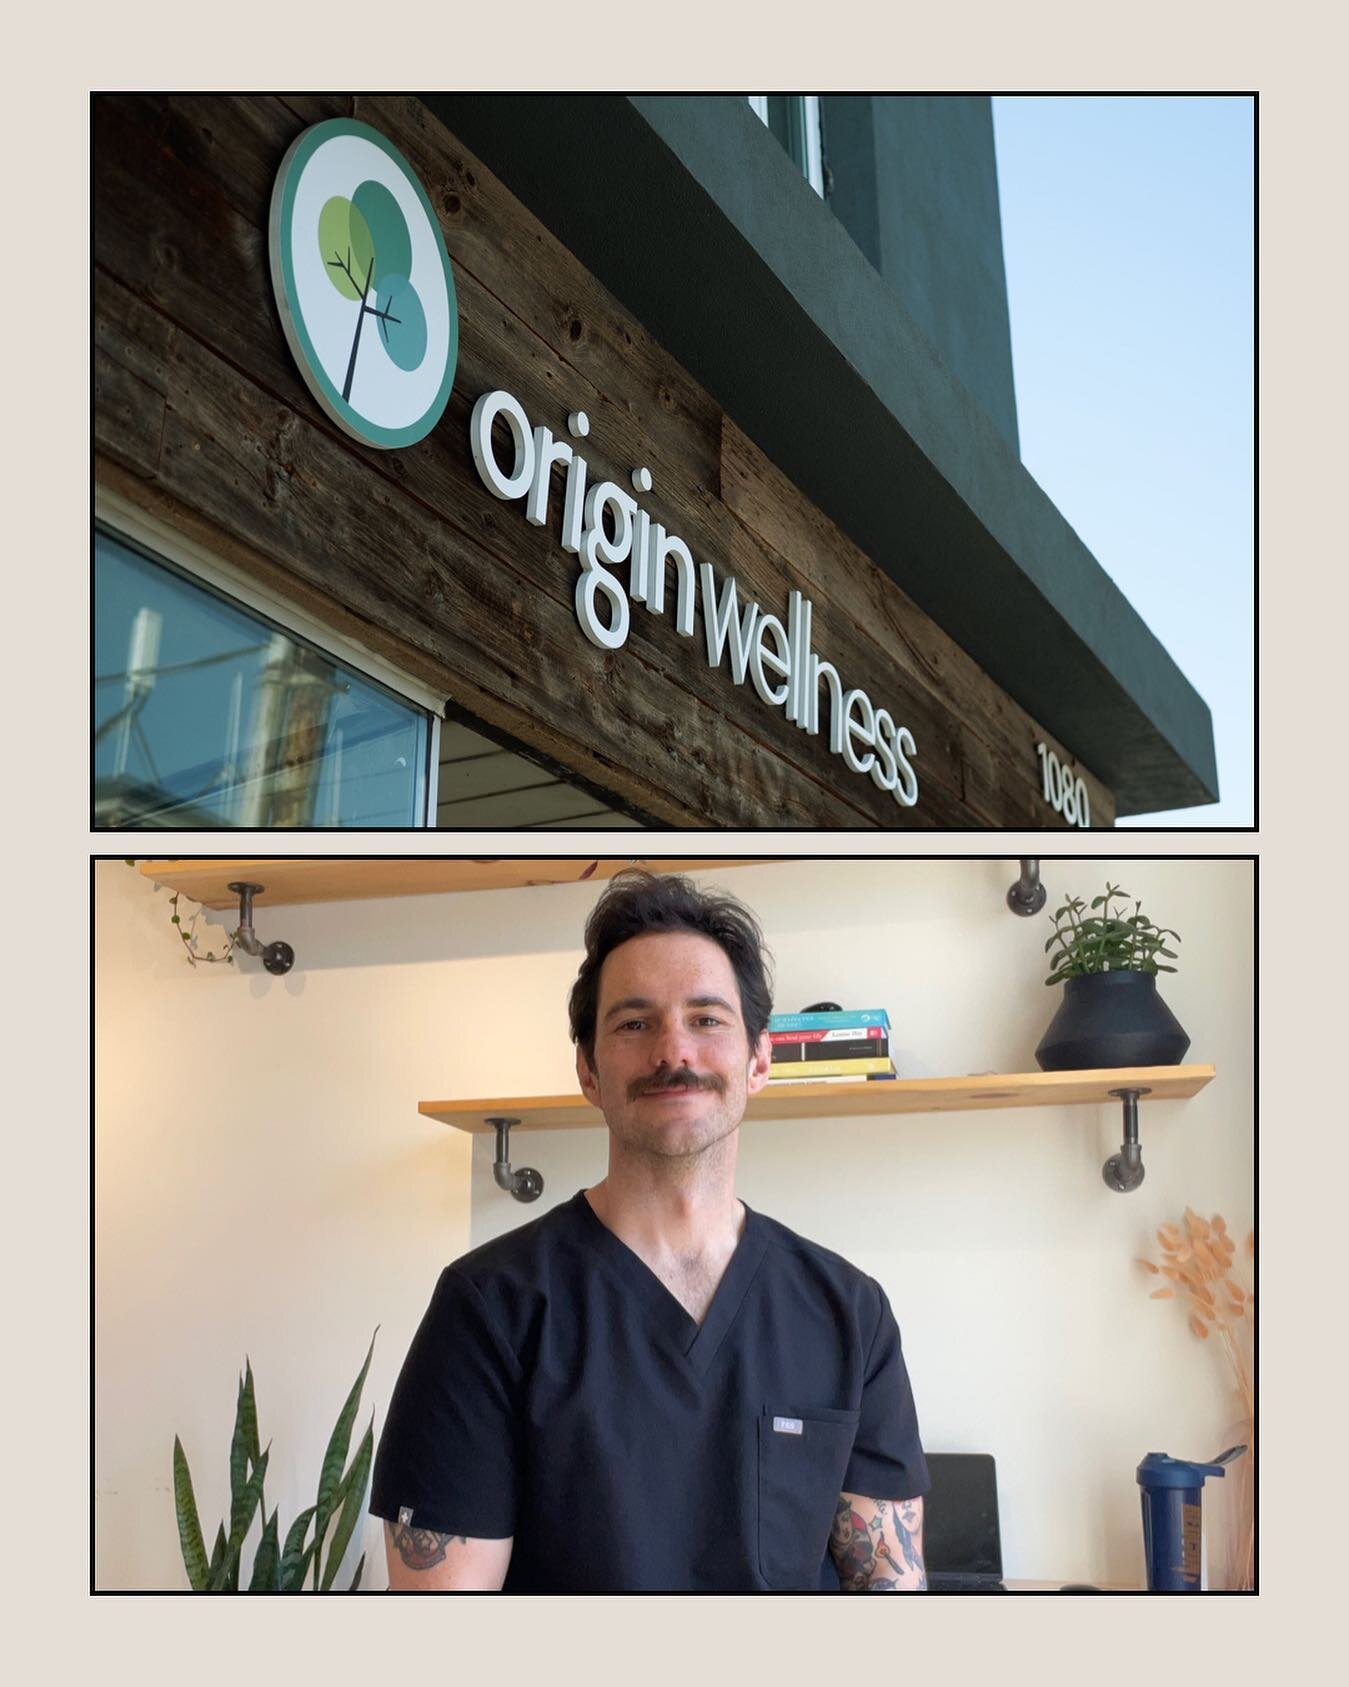 The announcement you&rsquo;ve all been waiting for&hellip;

It is my pleasure to announce that Napier Osteopathy will be expanding it&rsquo;s practise with Origin Wellness in Dovercourt Village!

Origin Wellness is a multidisciplinary clinic space th